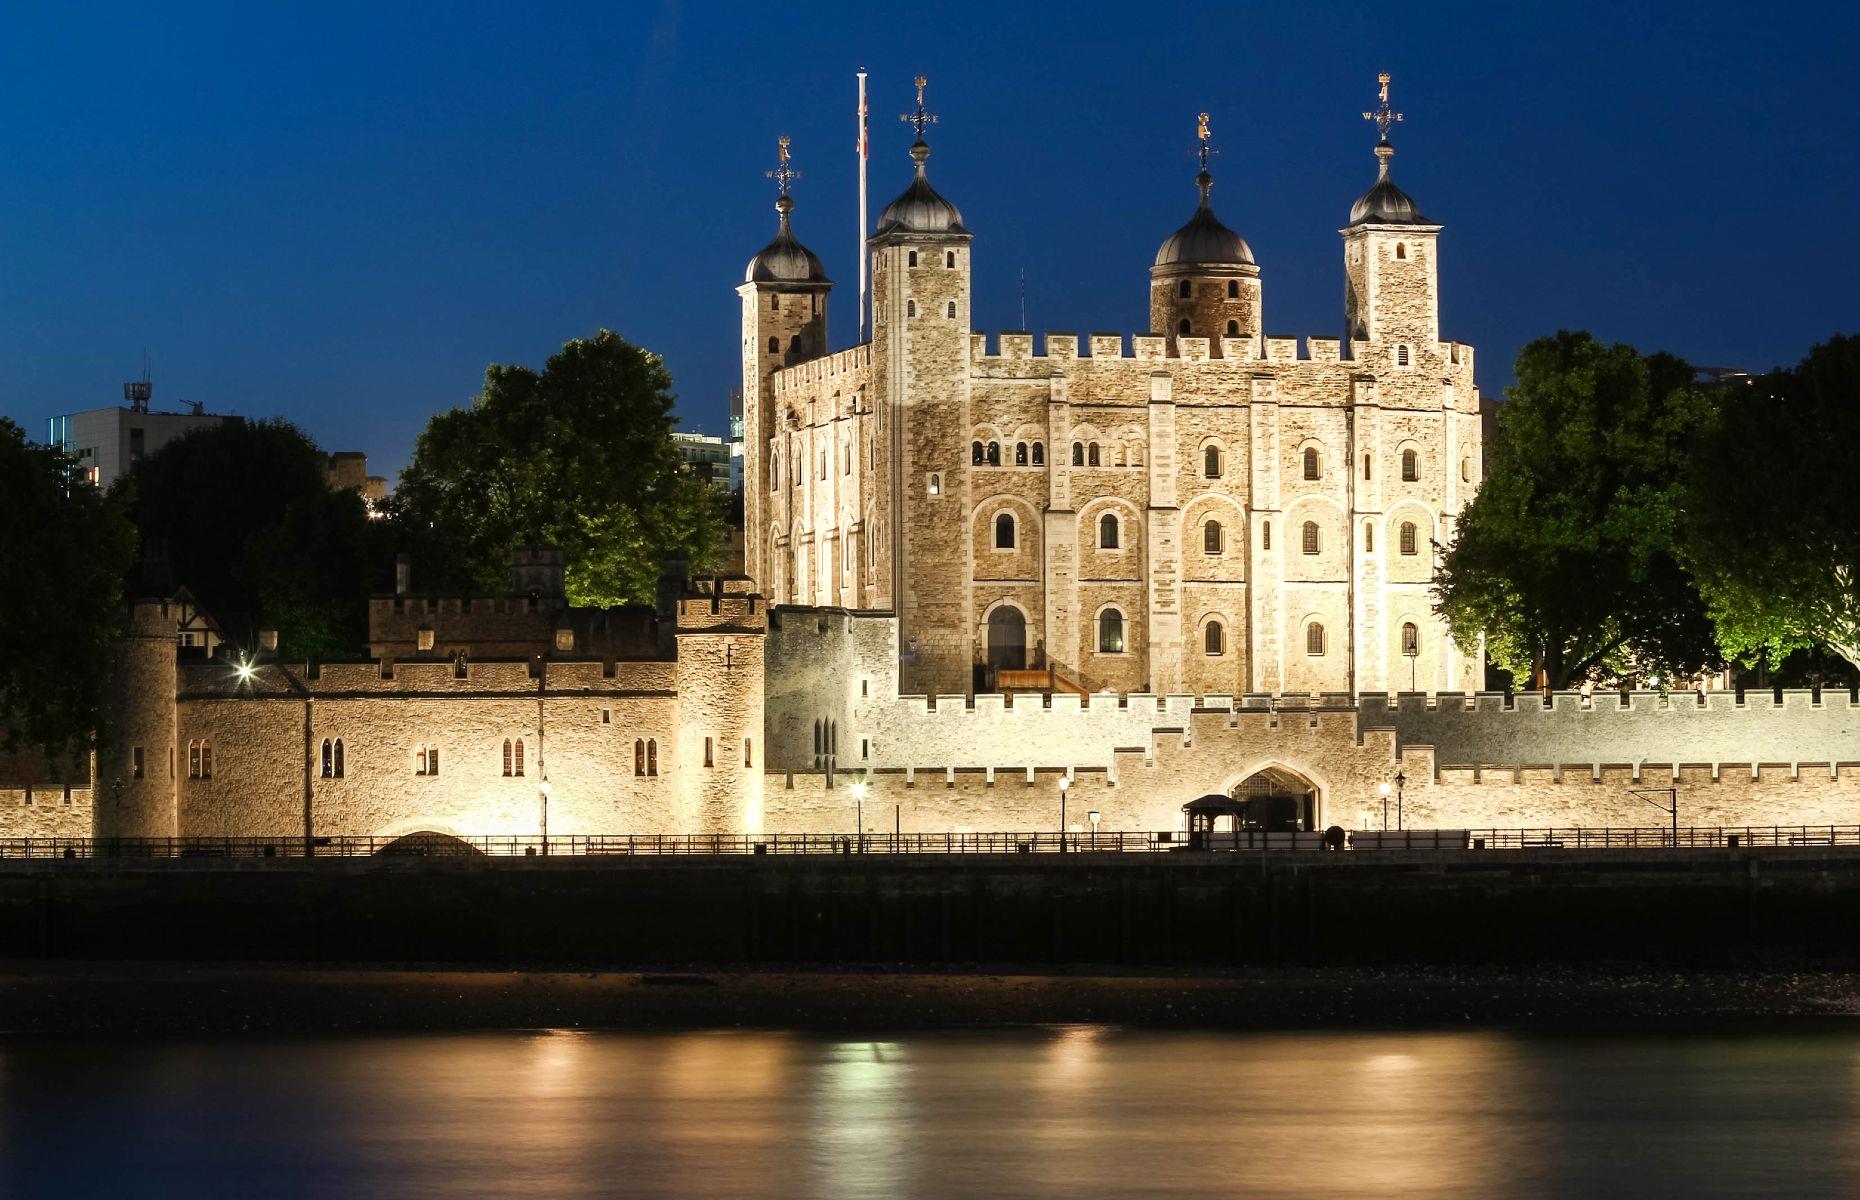 <p>The <a href="https://www.hrp.org.uk/tower-of-london/">Tower of London</a> is shrouded in mystery and echoes with tales of torture and death. It was here that two princes mysteriously disappeared during the reign of Richard III, and where Anne Boleyn was imprisoned by Henry VIII before her execution. Although its days as a fortress and royal palace are long gone, visitors can step back in time by exploring its attractions including the Crown Jewels and the Royal Armouries, which is the oldest museum in Britain.</p>